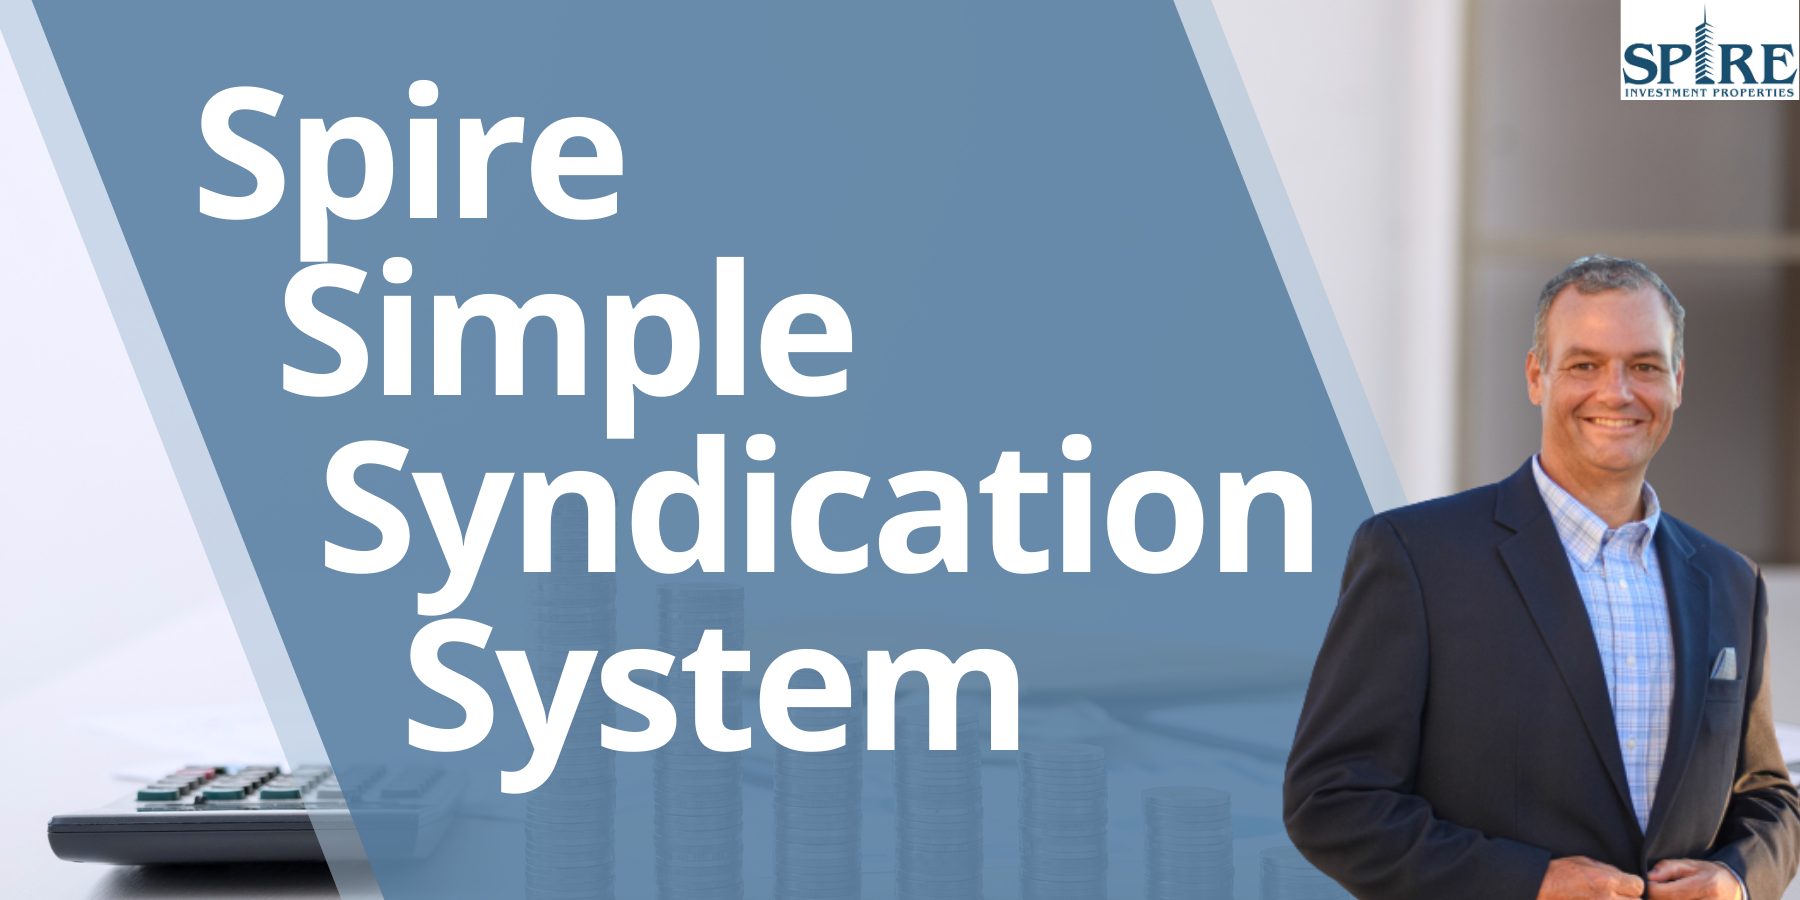 Spire Simple Syndication System (1)